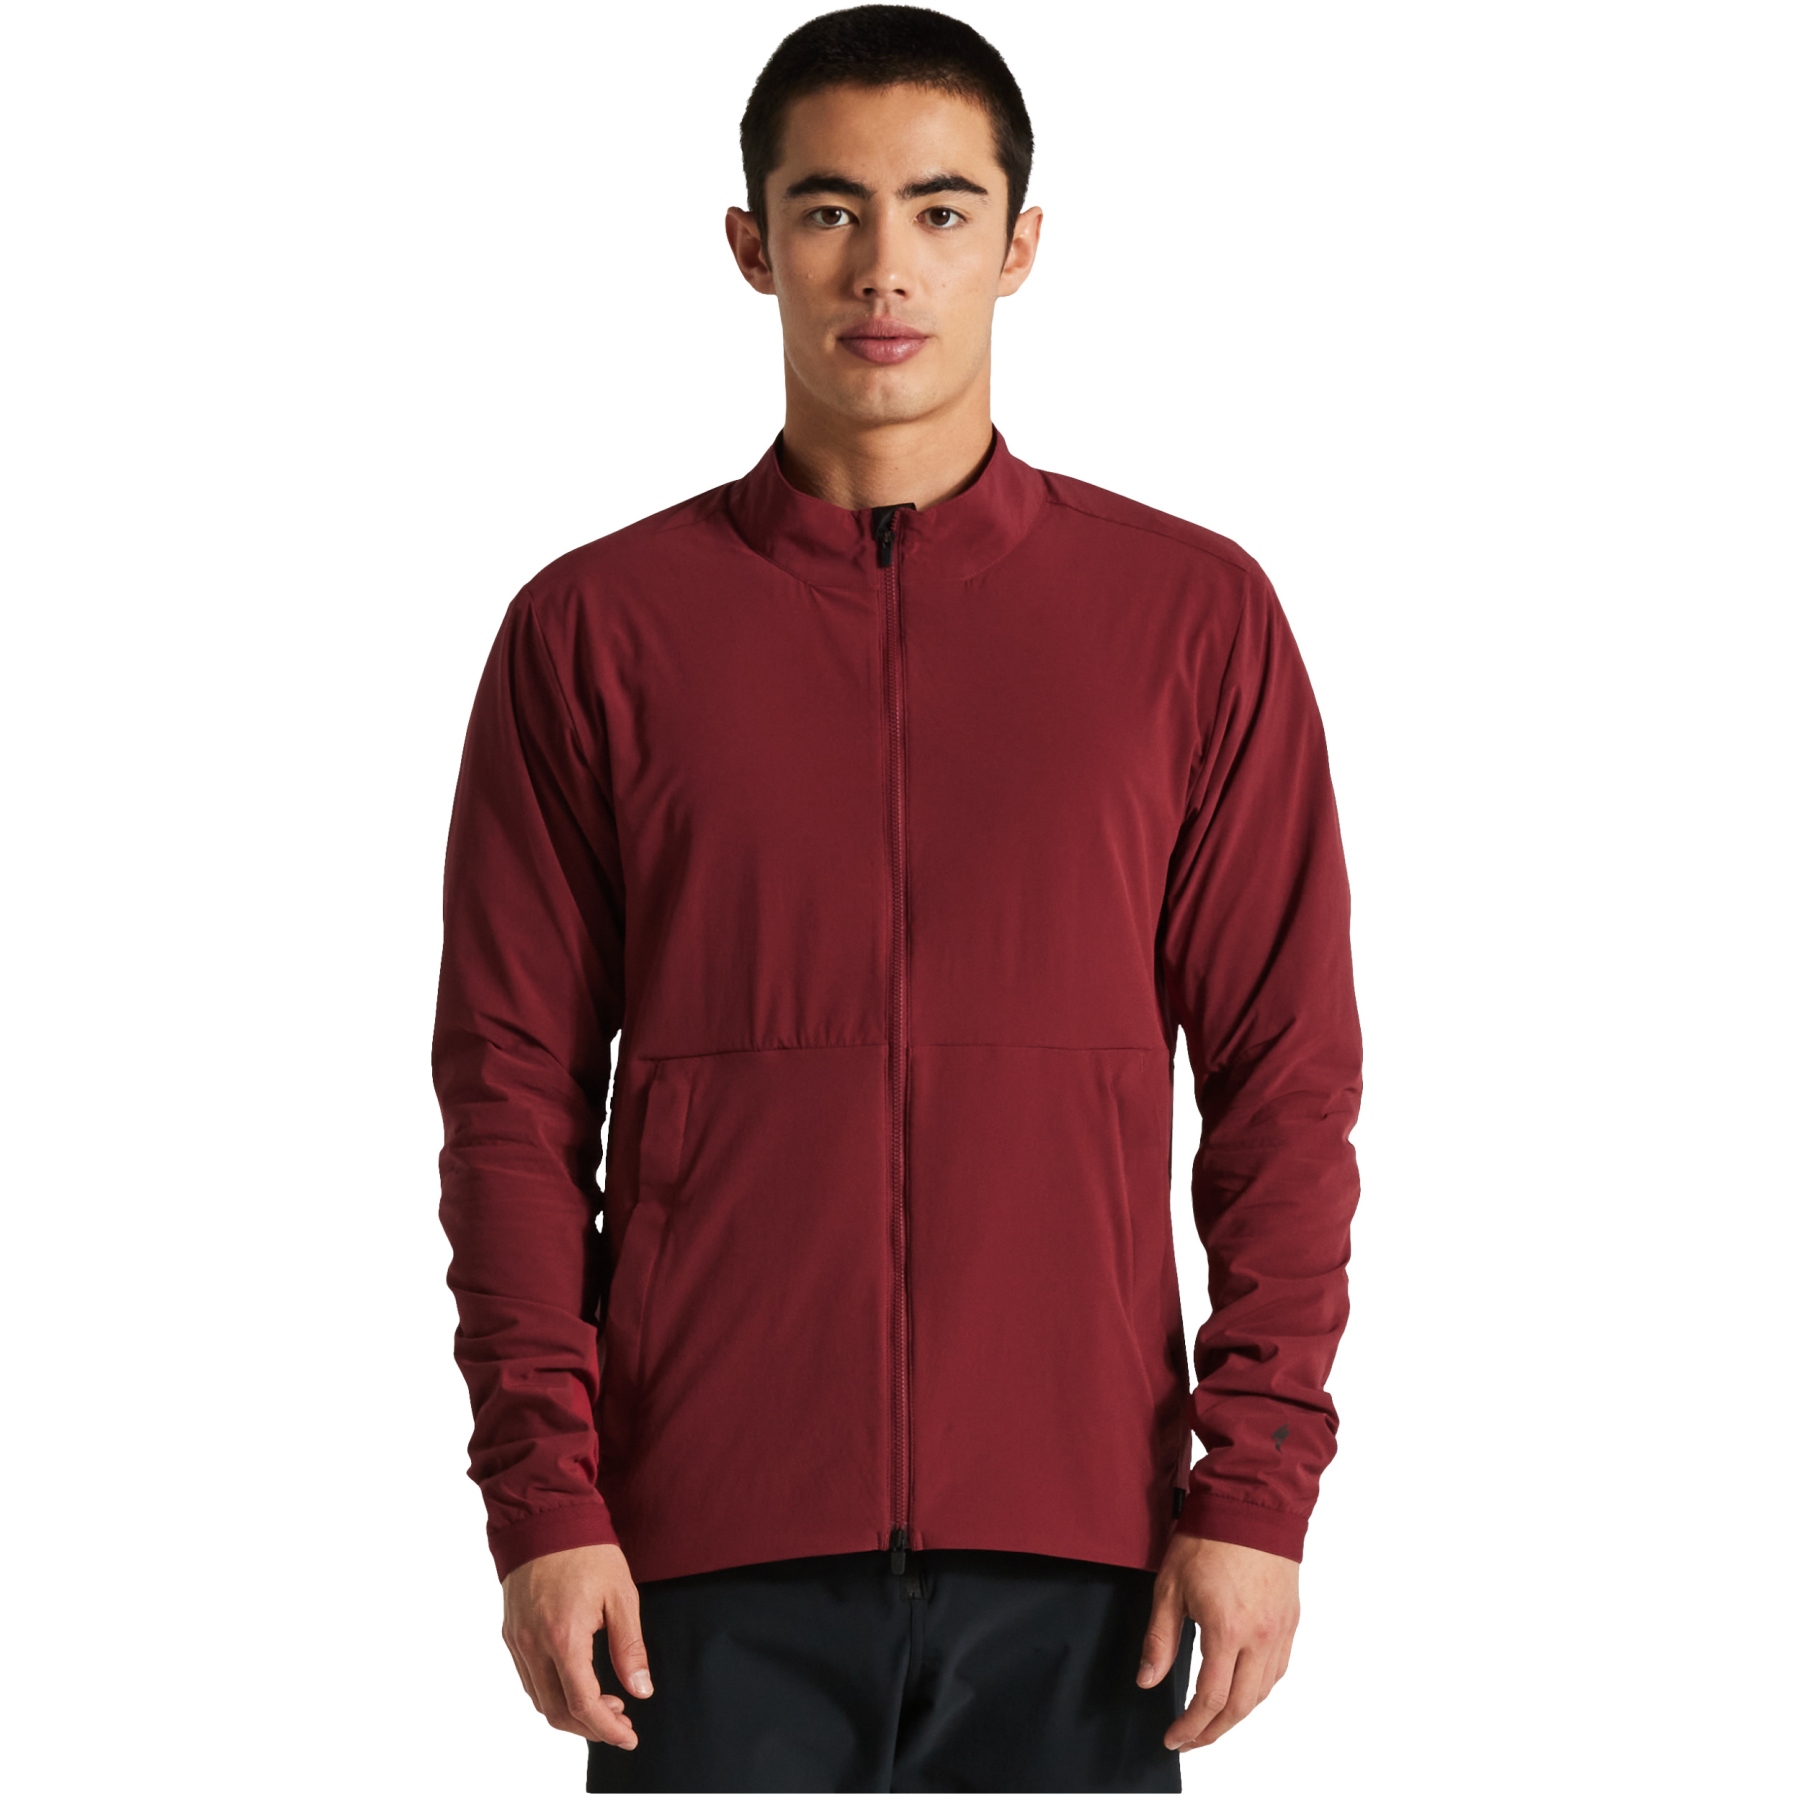 Image of Specialized Trail Alpha Jacket Men - maroon